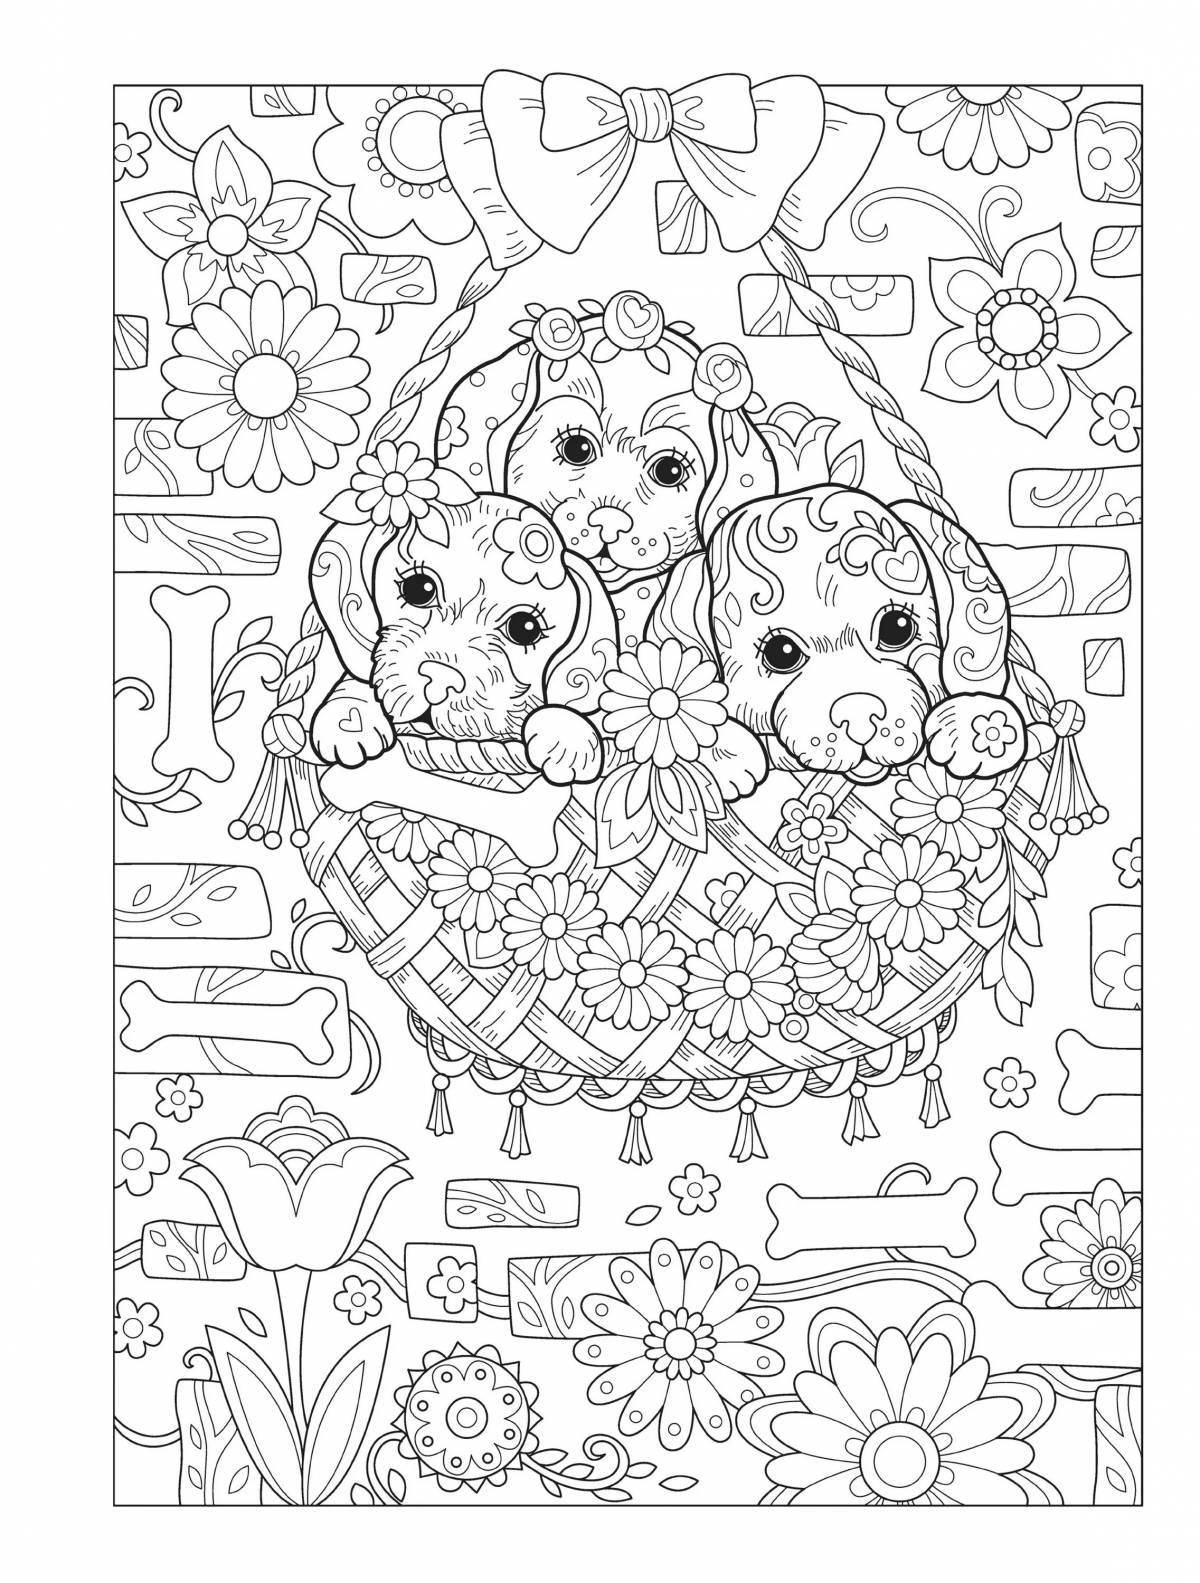 Colourful anti-stress coloring book for girls